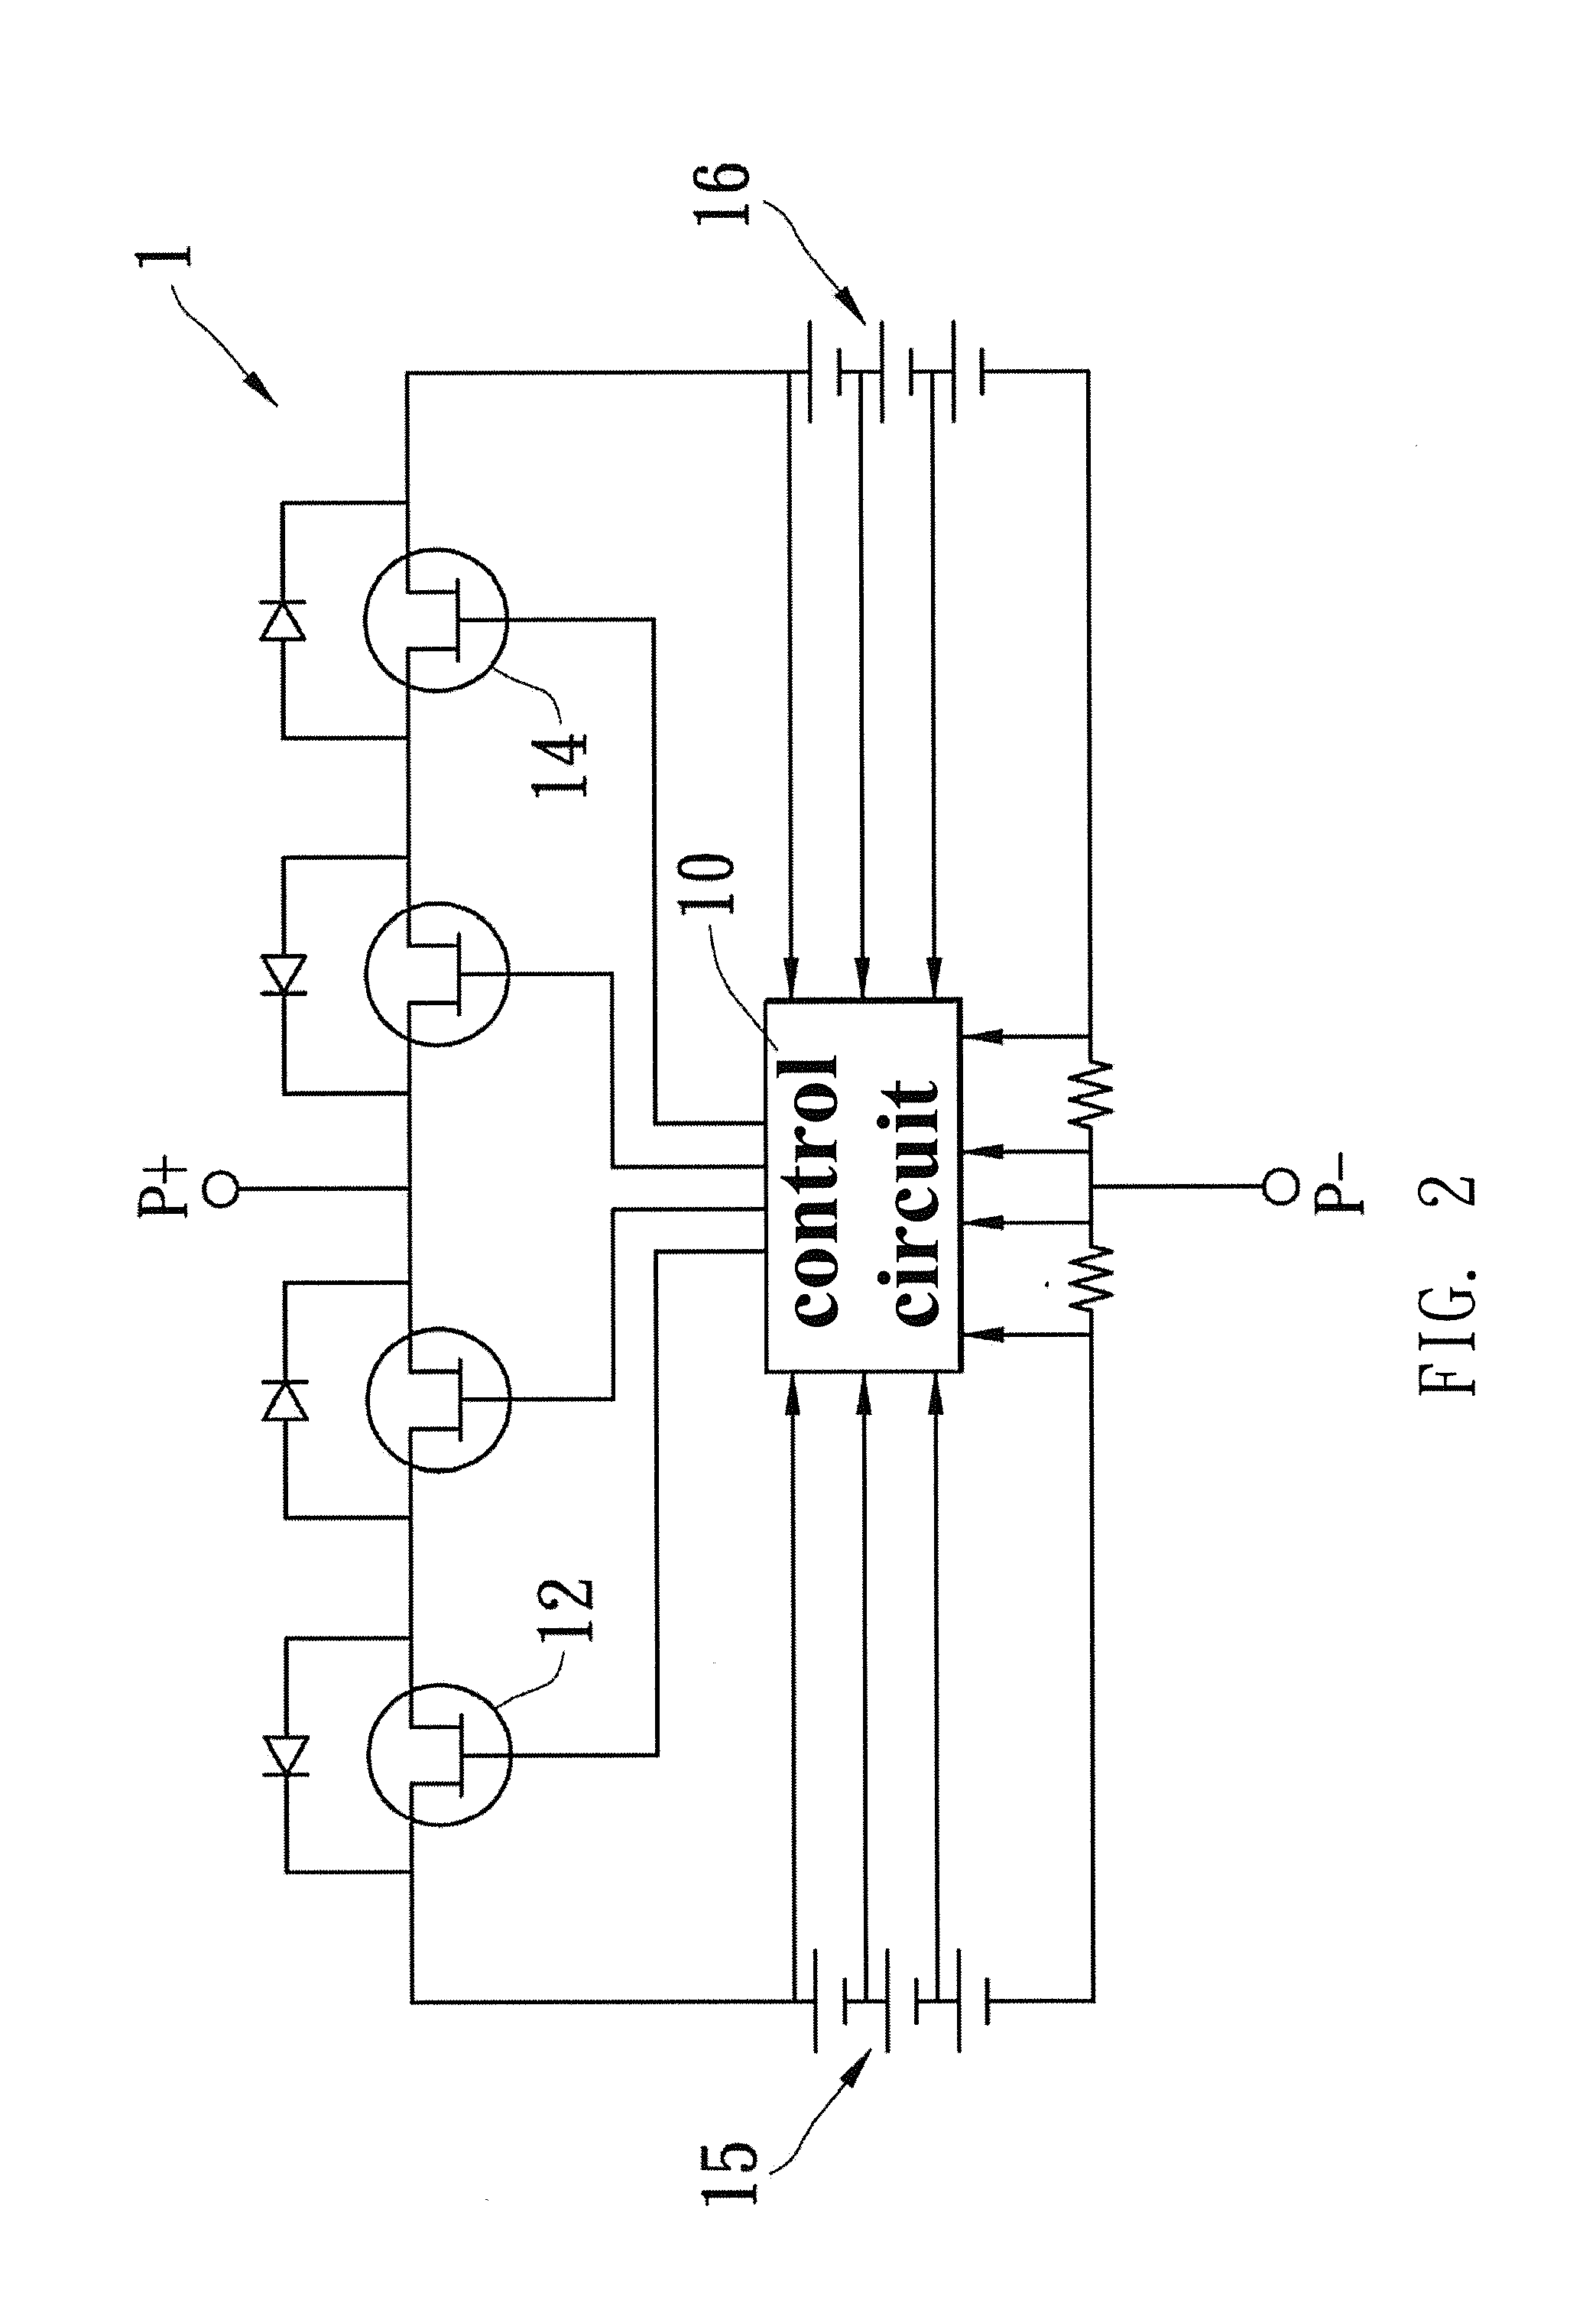 Discharge method for a battery pack